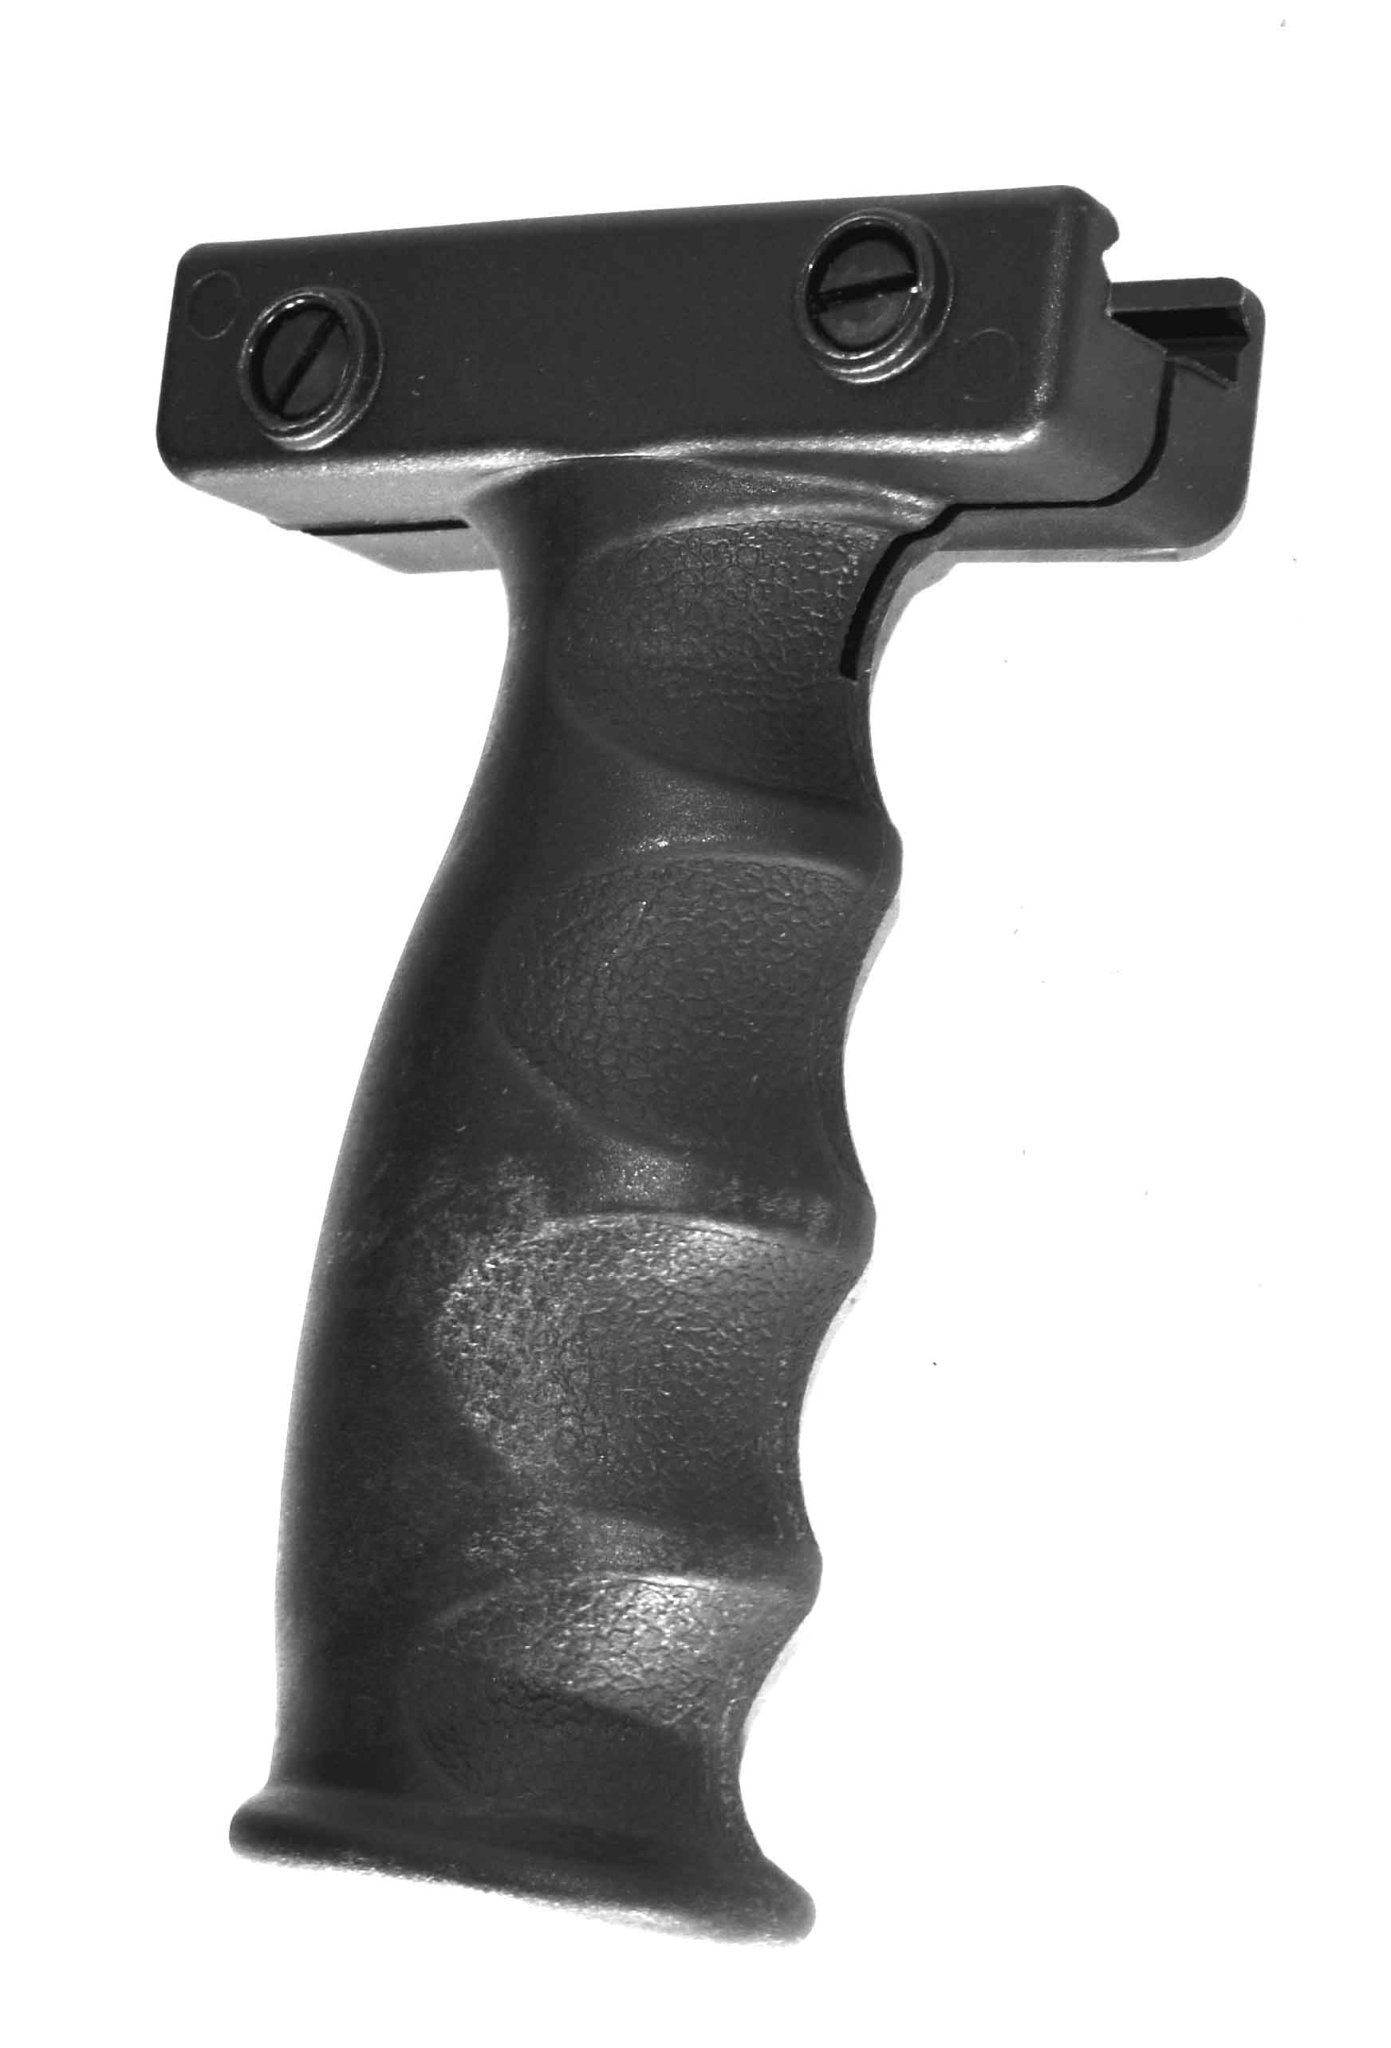 Mossberg 590 12 Gauge forend Pump handguard with side rails and tactical grip black hunting tactical home defense. - TRINITY SUPPLY INC